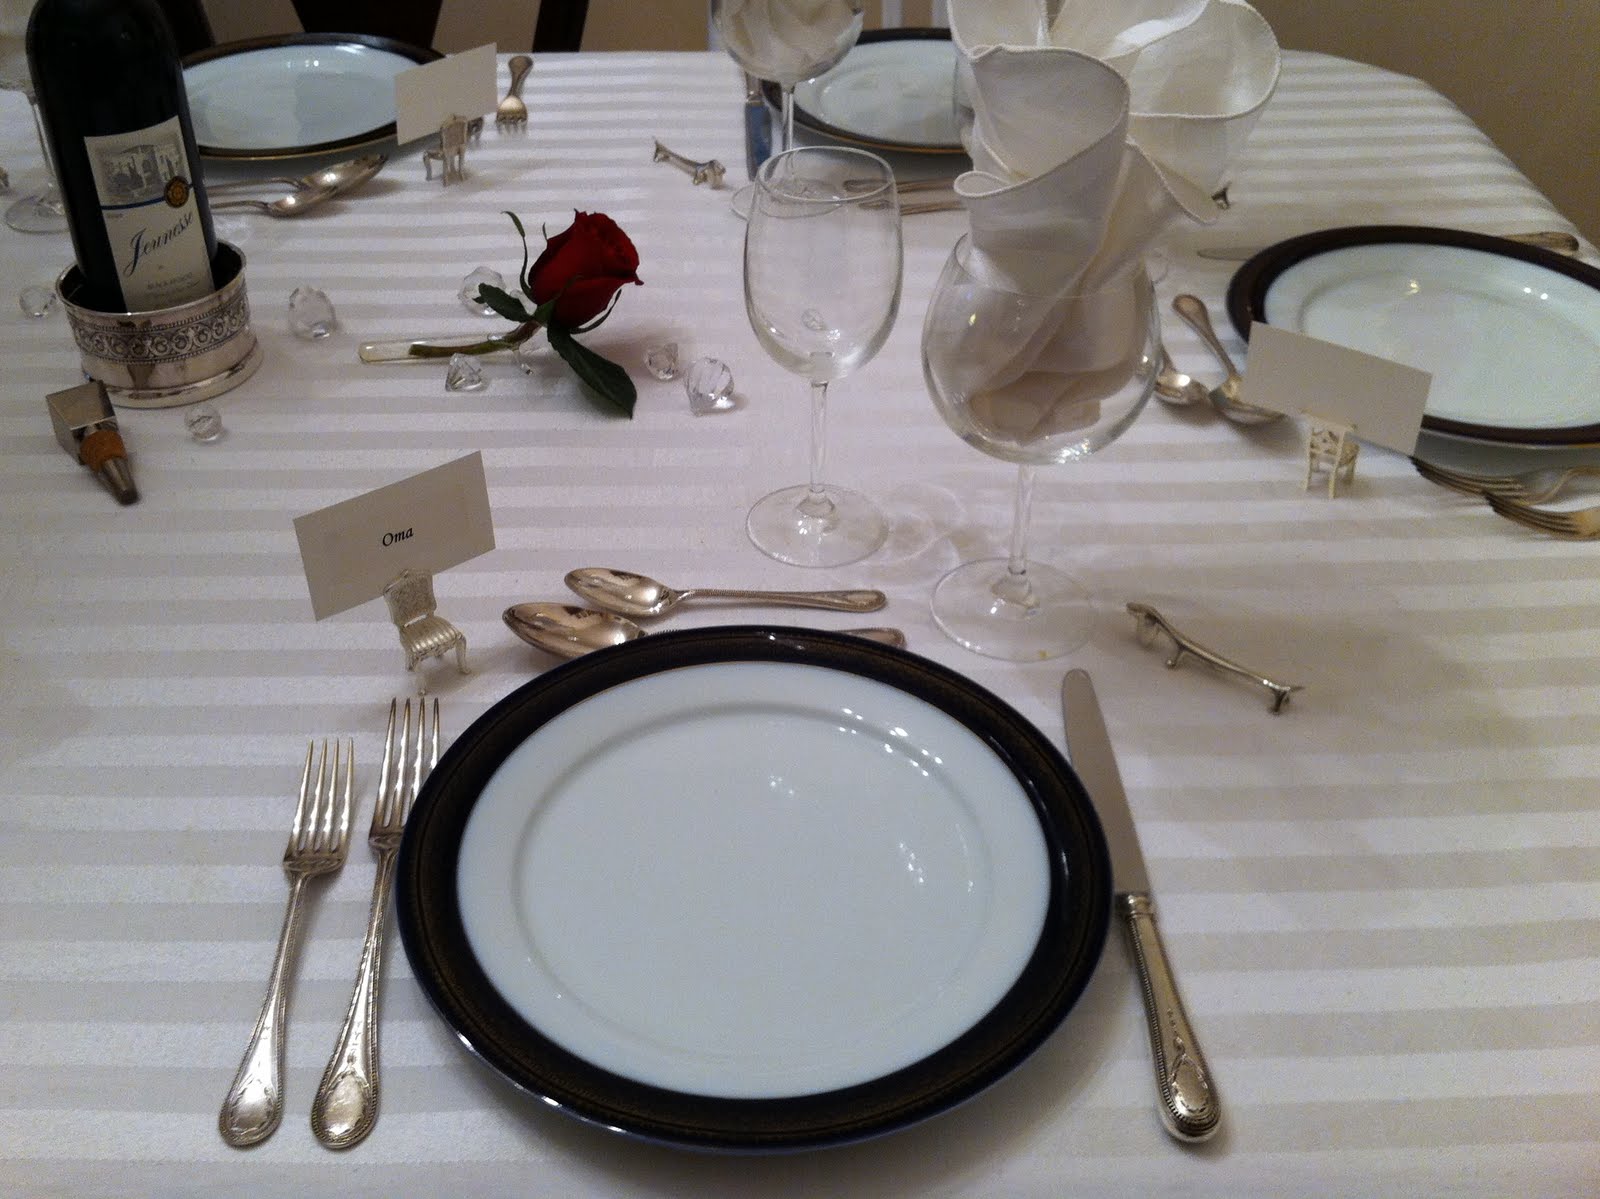 Guess Who's Coming To Dinner: Always Time For One More Shabbos Table Photo